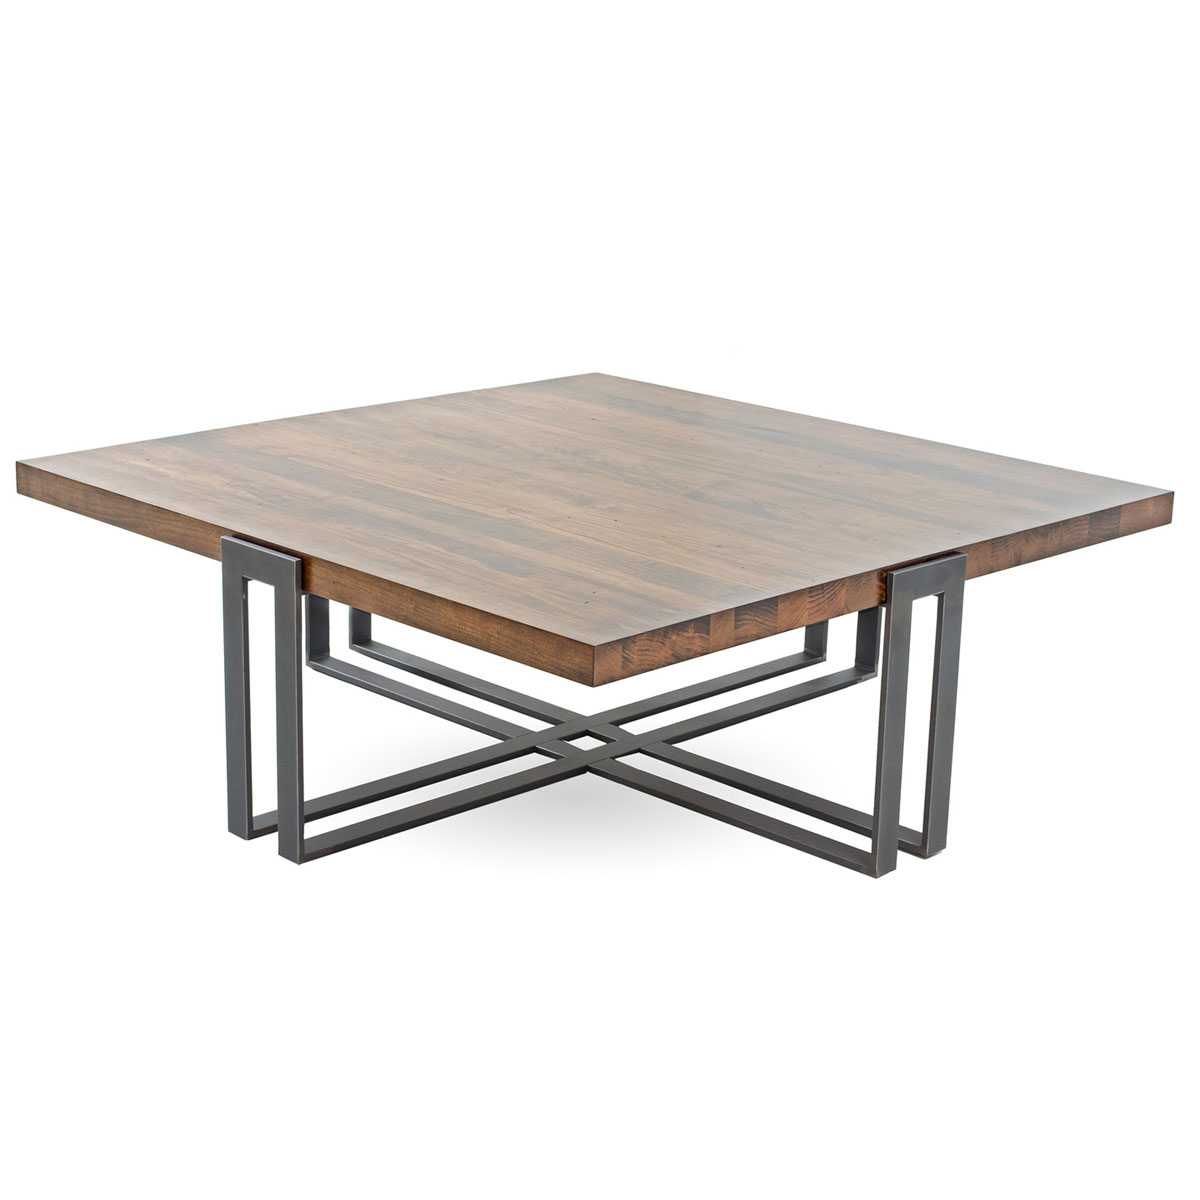 Charleston Forge Watson 54 inch Square Cocktail Table